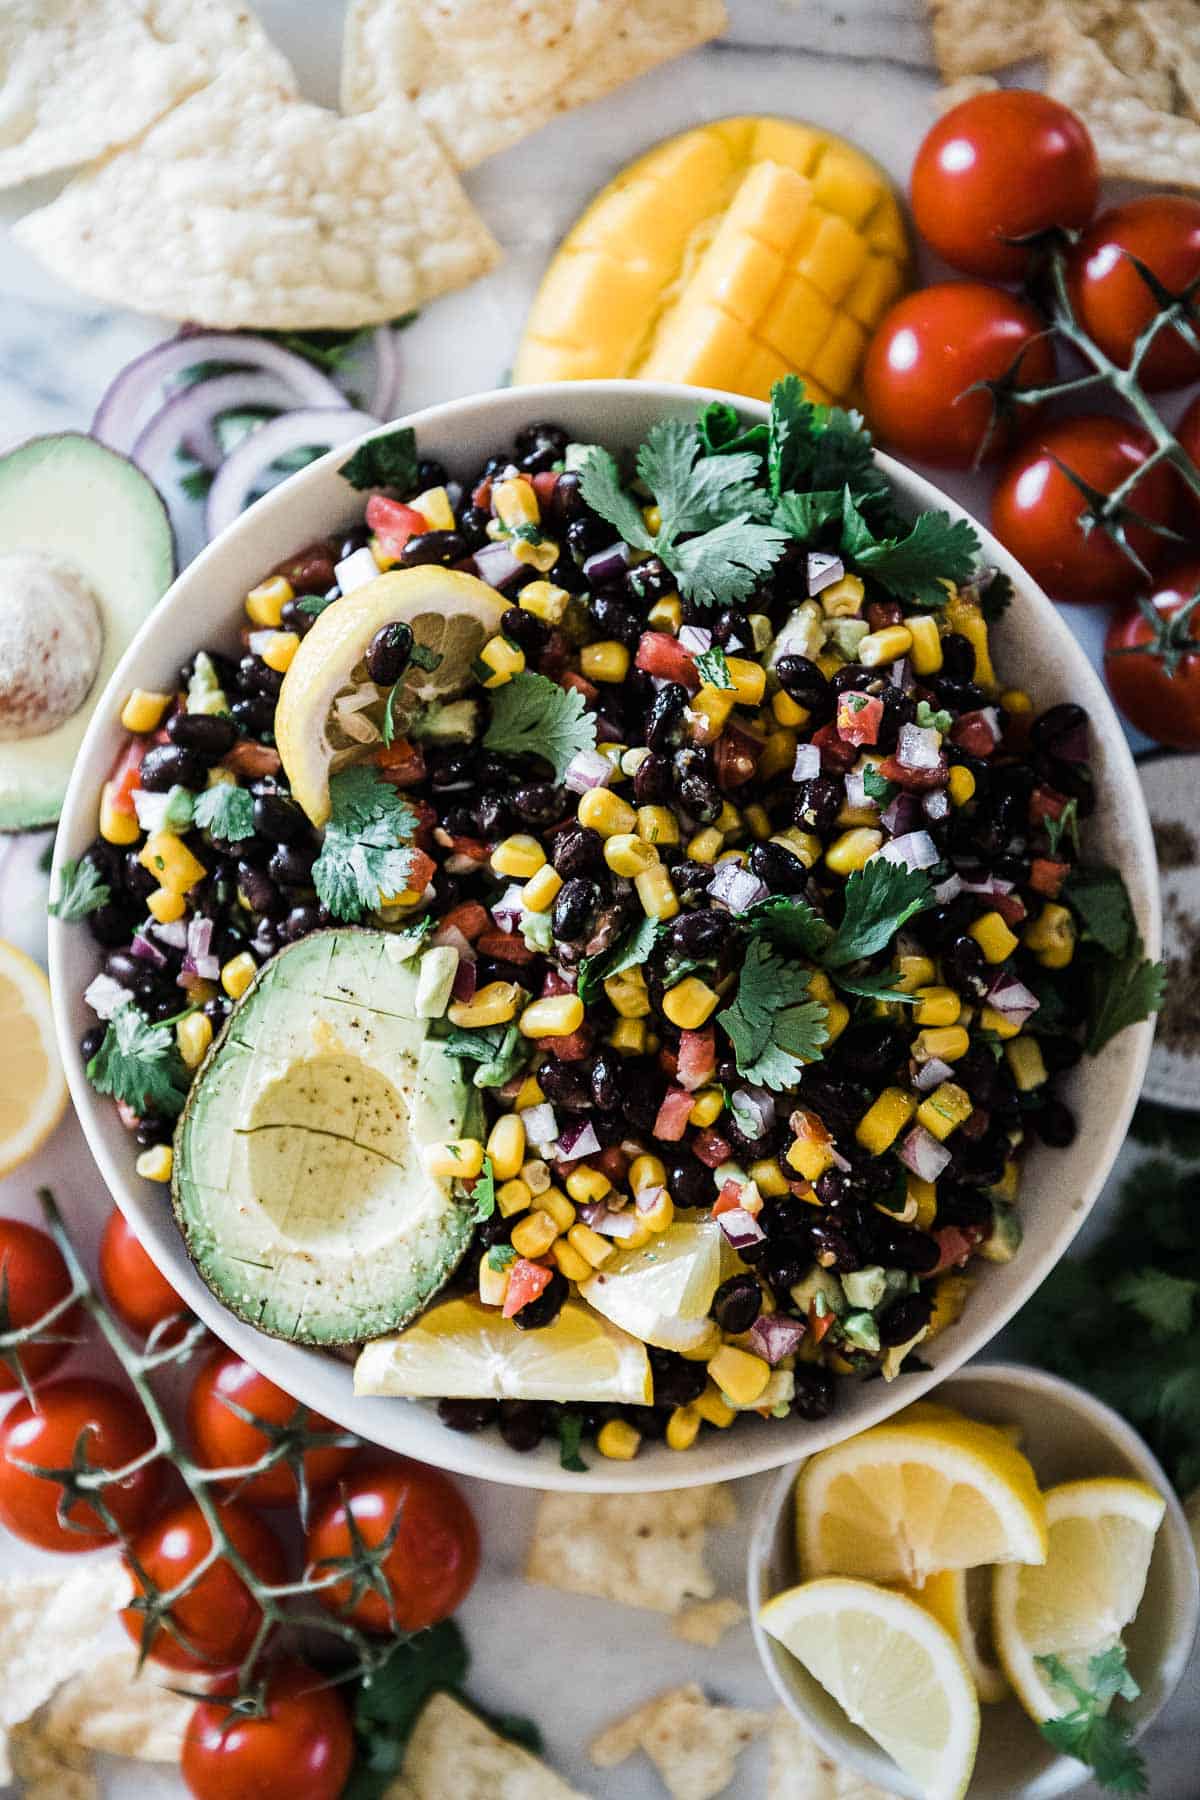 Black bean salsa in a large while bowl. It is garnished with limes, avocado, and lemons.